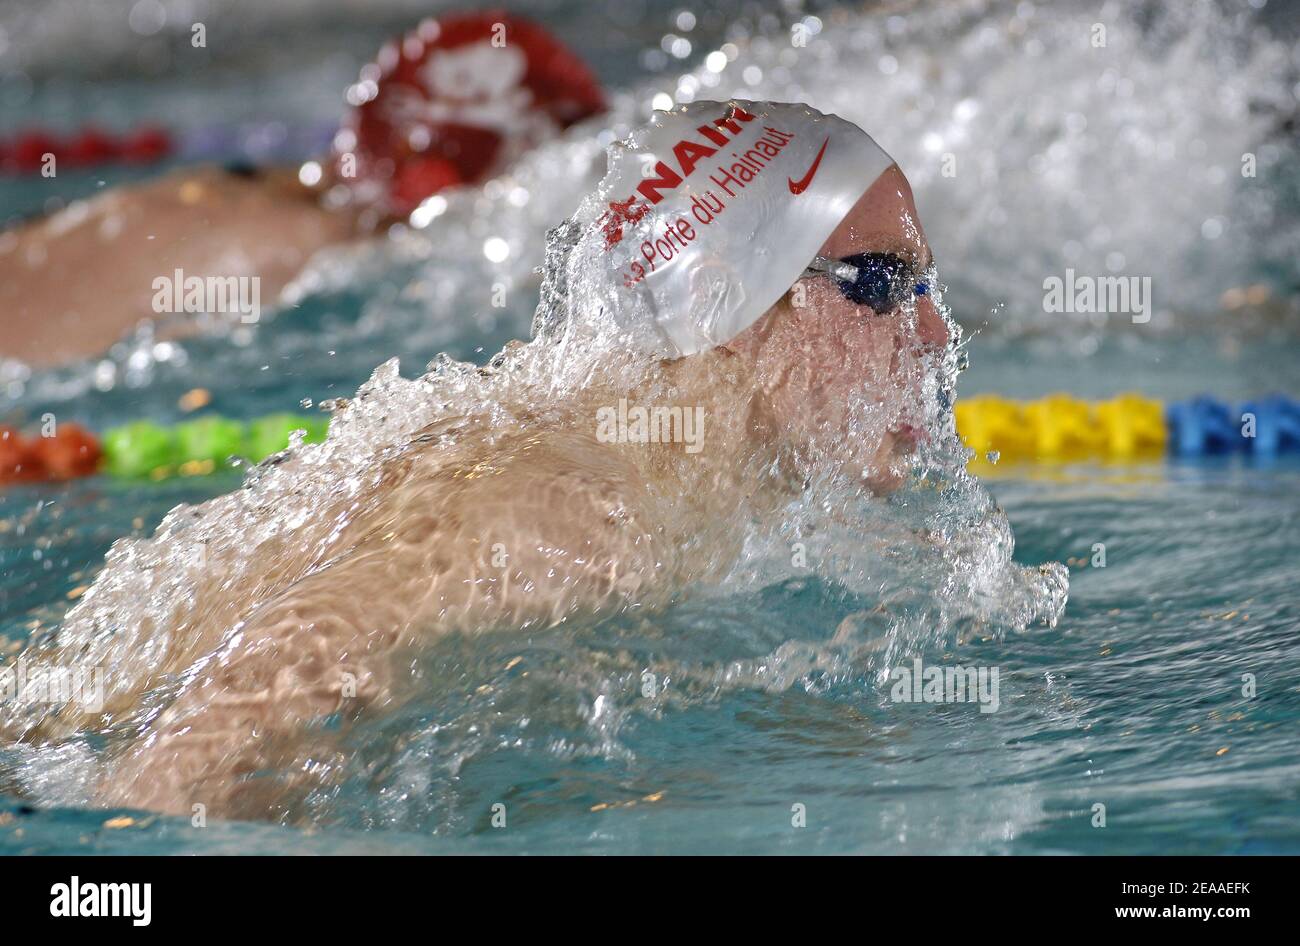 Jeremy Peinado of France in action on men's 100 meters breaststroke heats during the French swimming championships short course, in Chalon-sur-Saone, France, on December 1, 2005. Photo by Nicolas Gouhier/CAMELEON/ABACAPRESS.COM Stock Photo